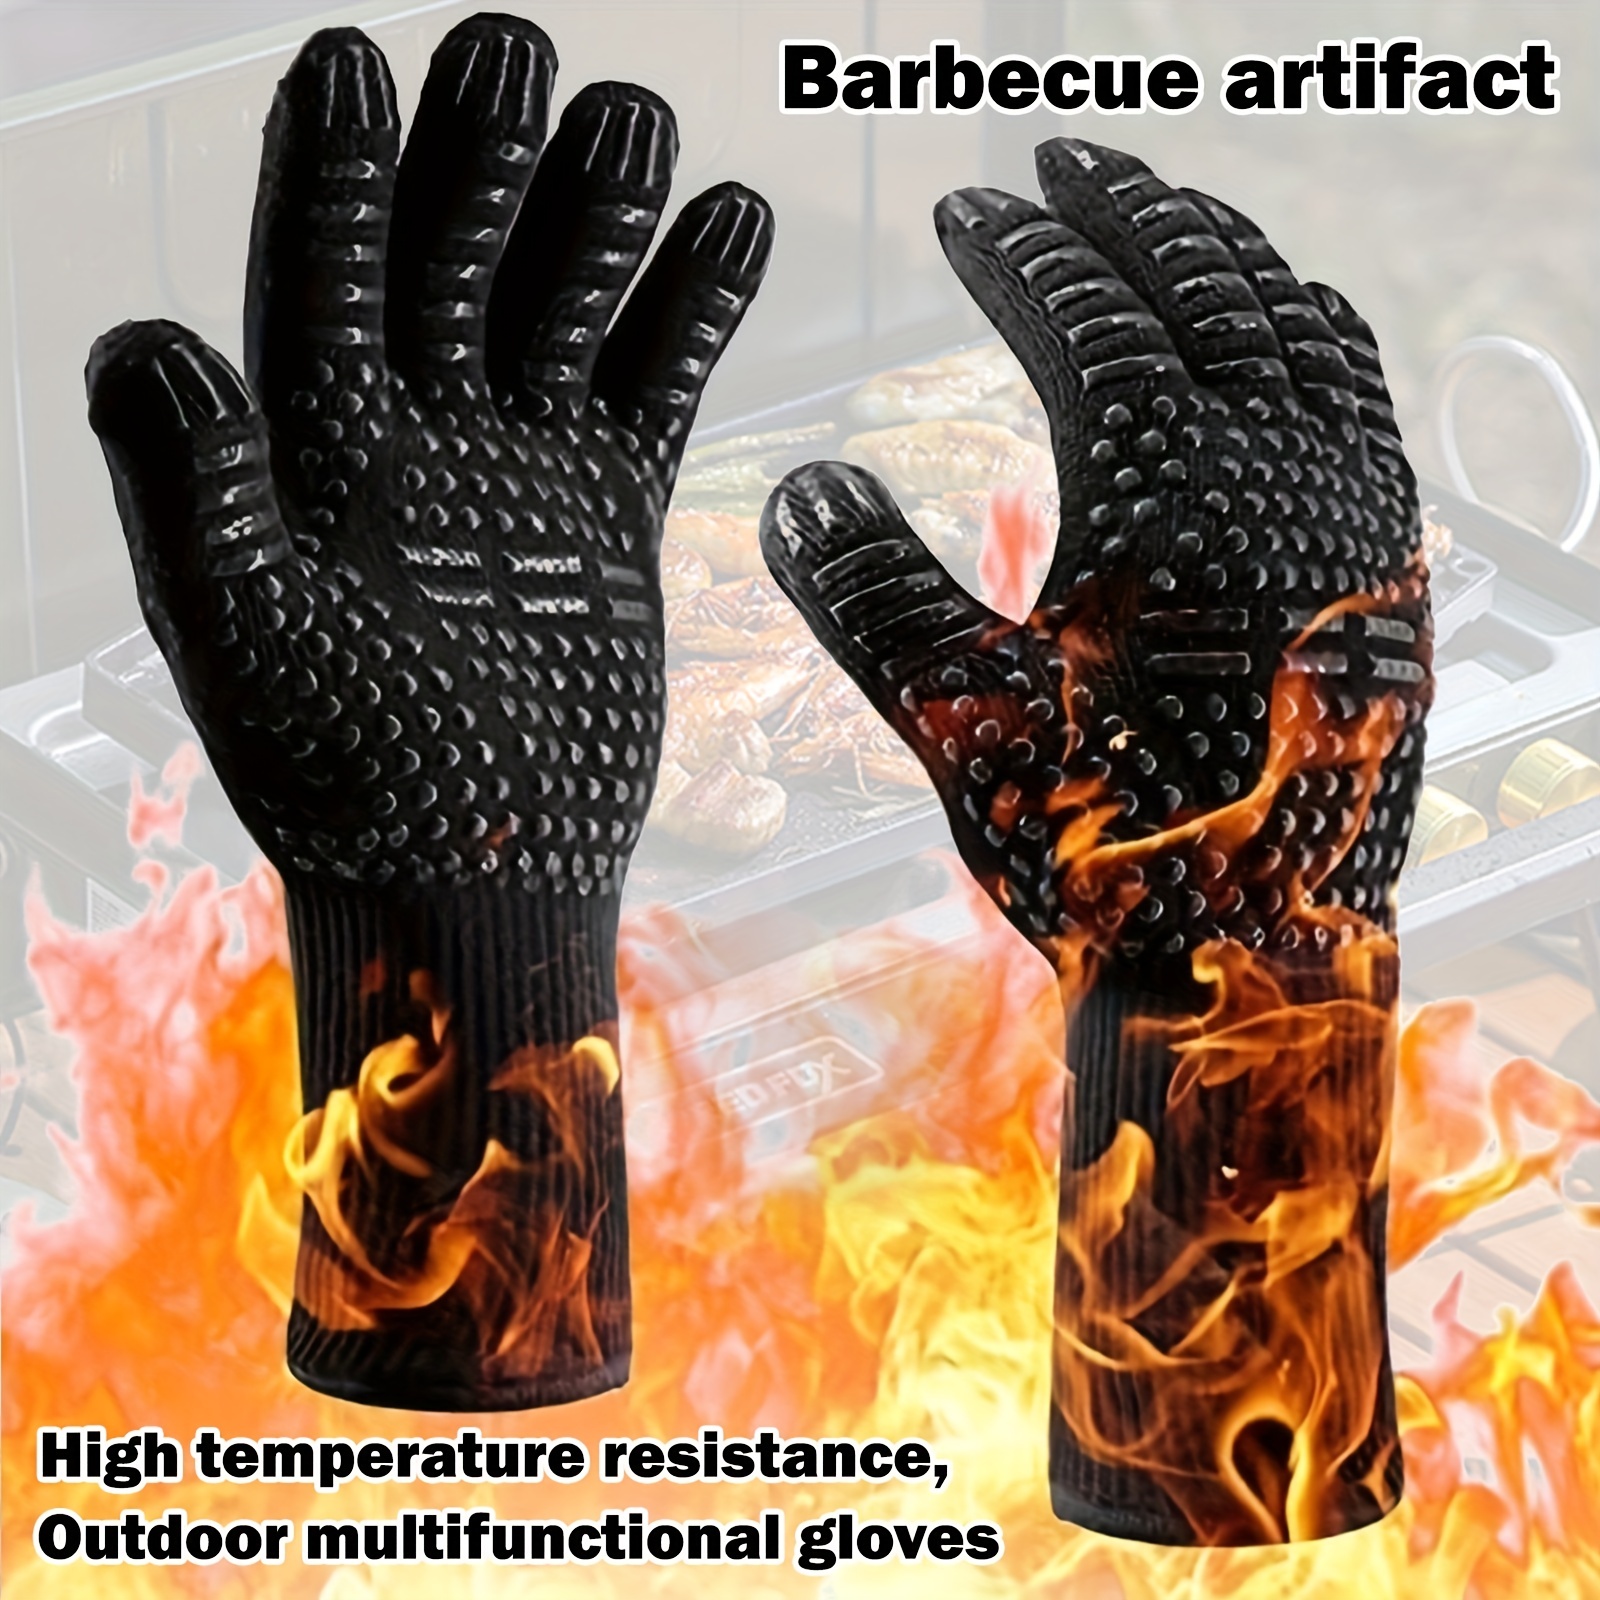 Neoprene Mini Oven Mitts, 2 Pack Short Oven Mitts 500 Degree Heat Resistant  Gloves Potholder to Protect Hands with Non-Slip Grip Surfaces and Hanging